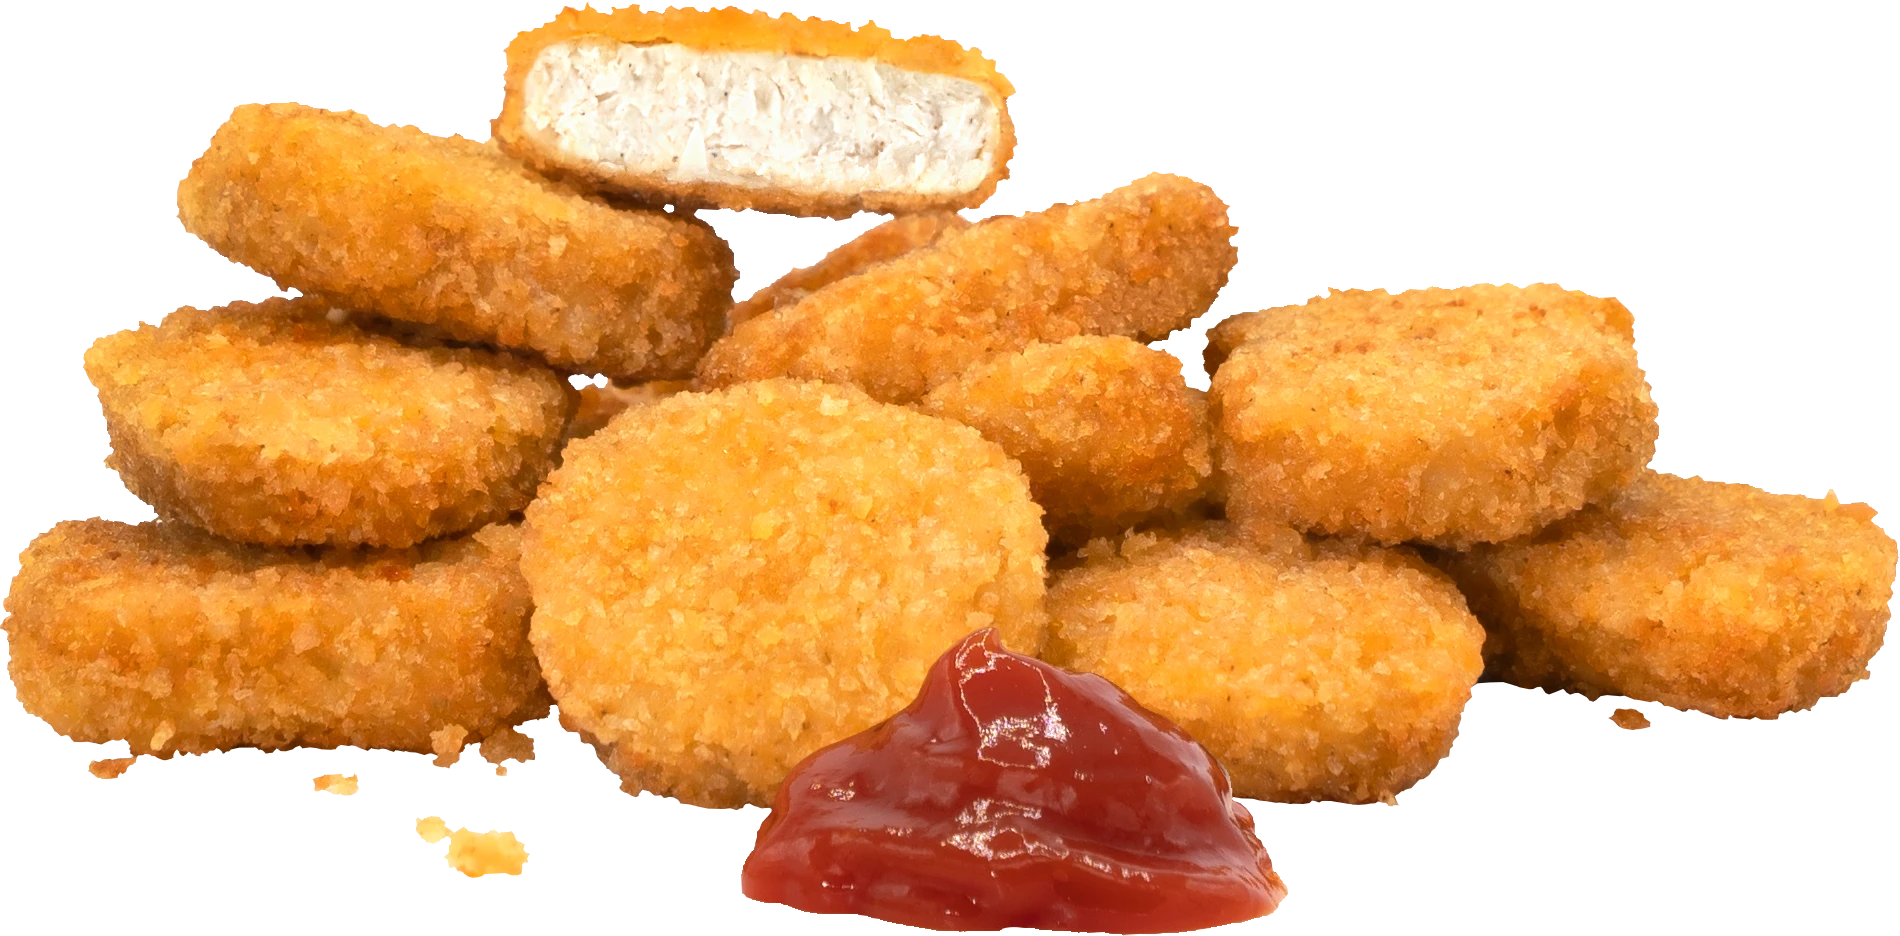 Stack of Impossible Chicken Nuggets next to a dollop of ketchup